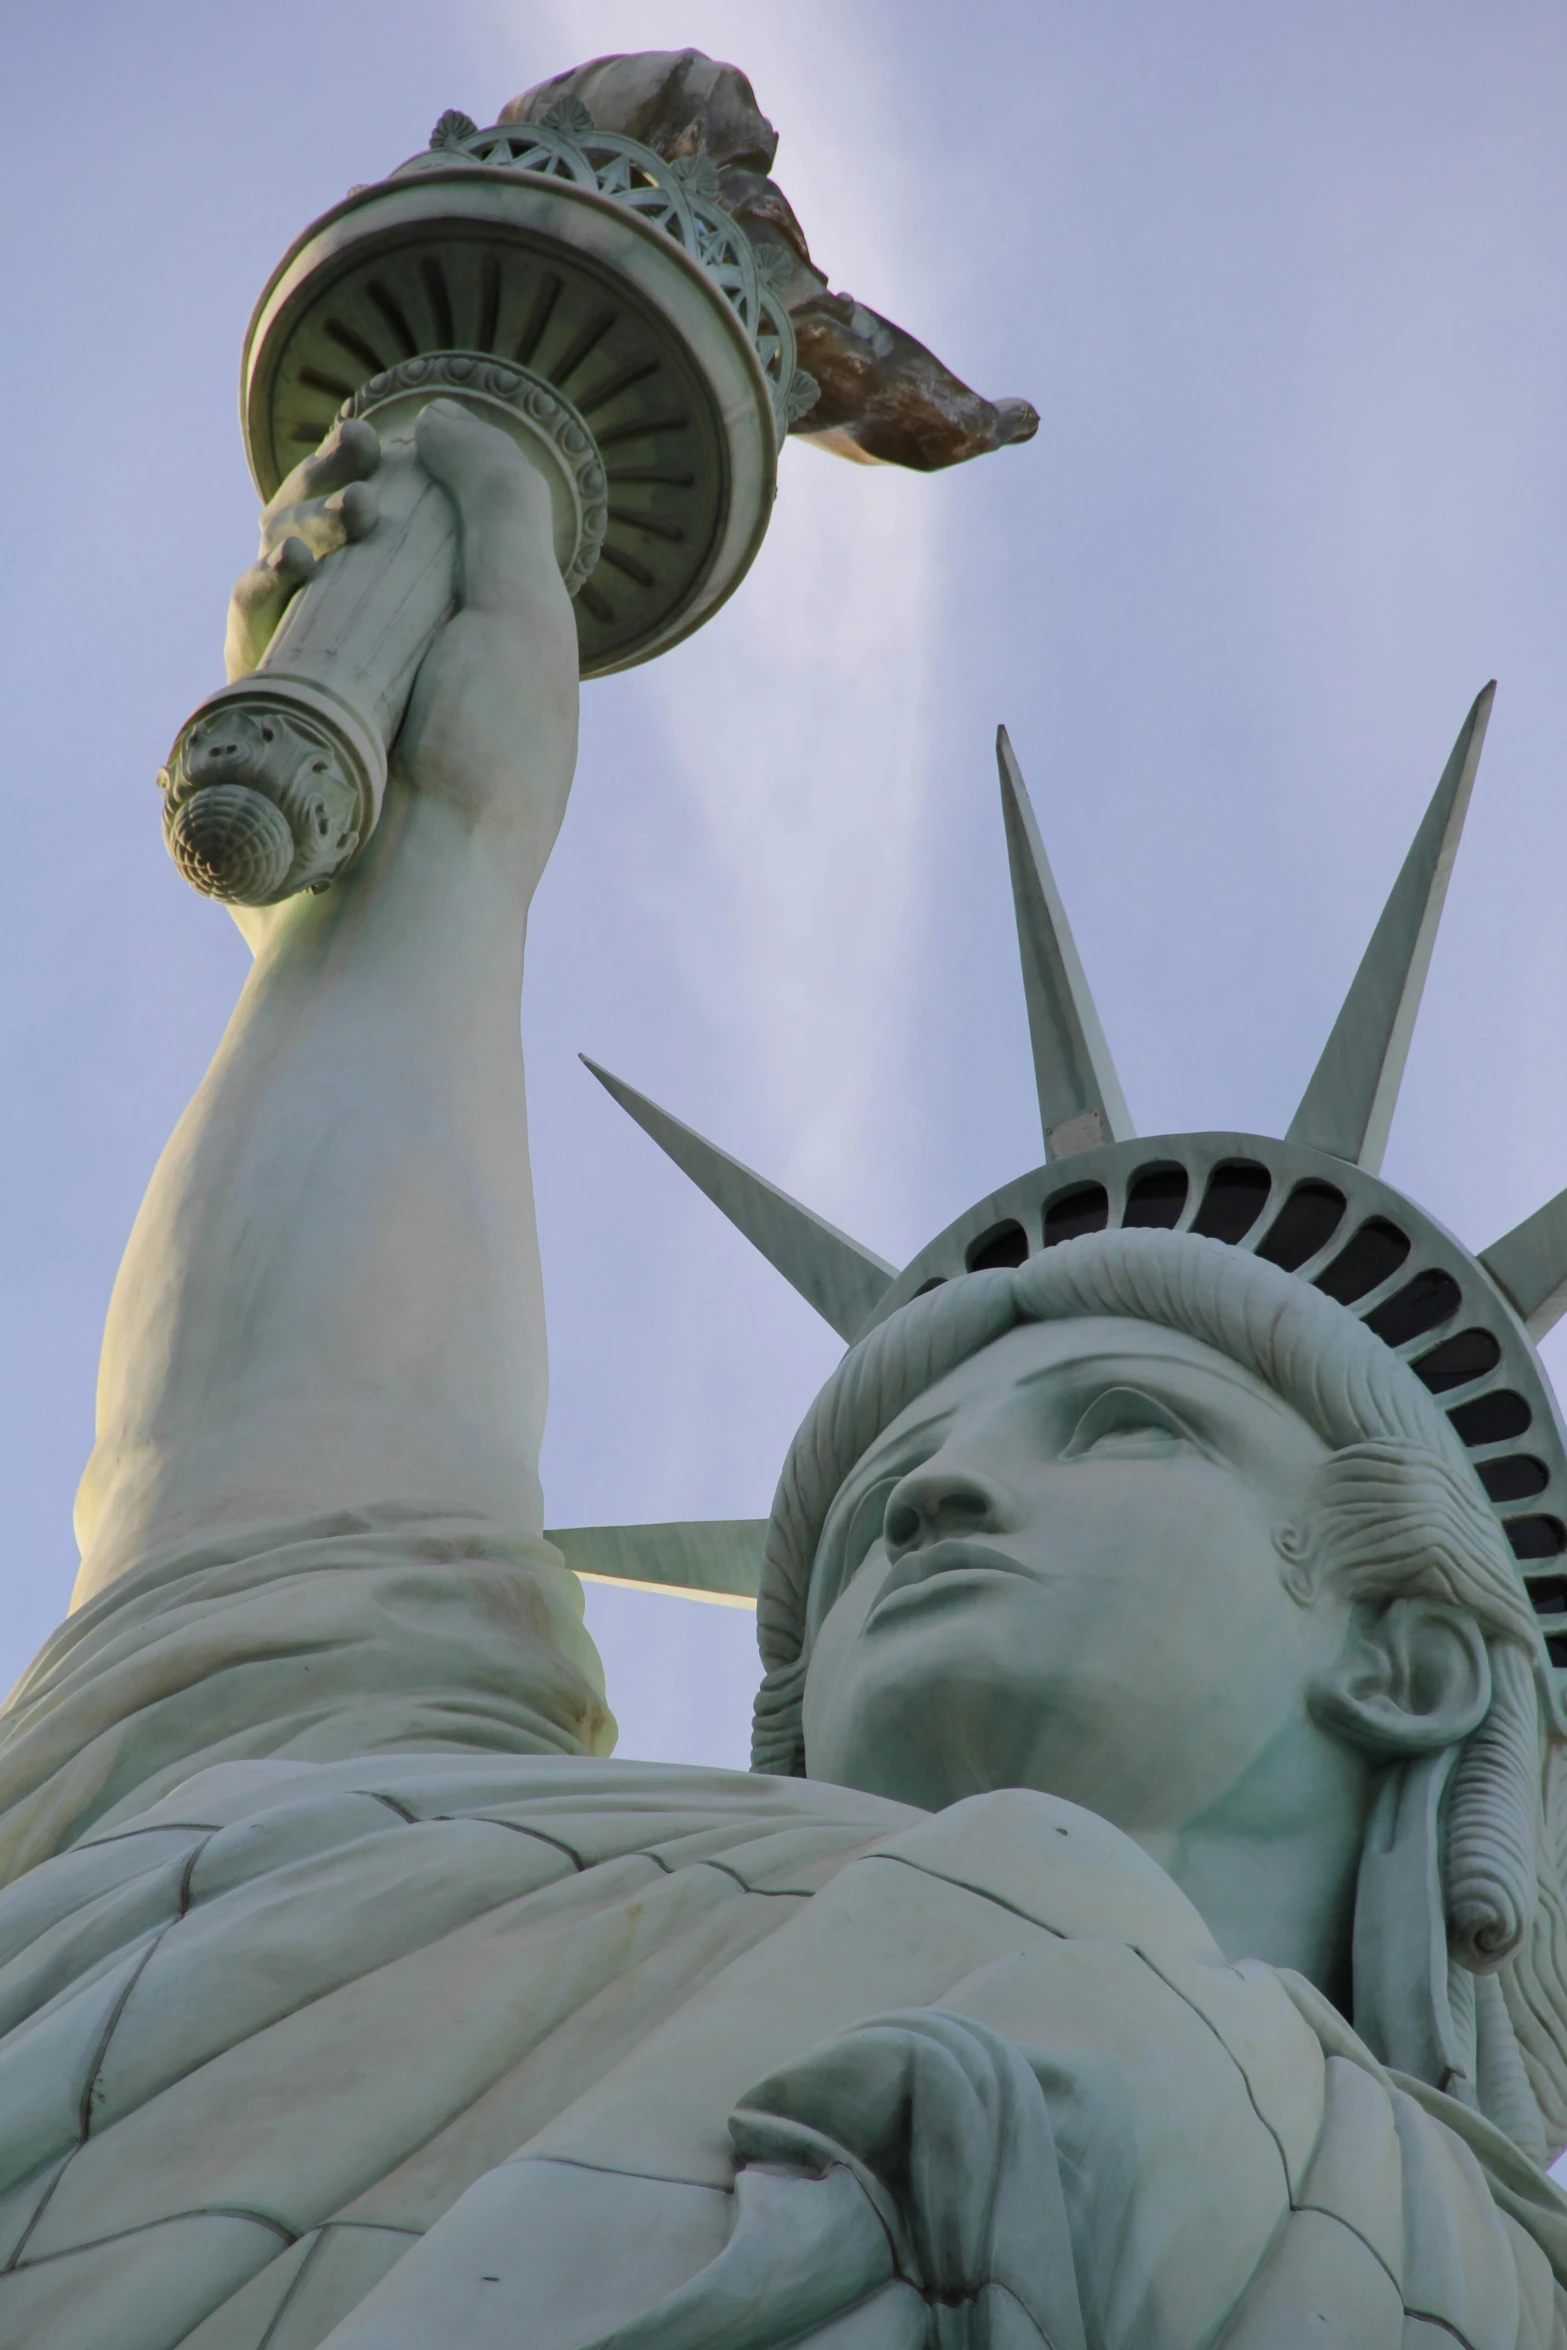 a close up of the statue of liberty, a statue, by Robert Thomas, exterior, up-close, beautiful views